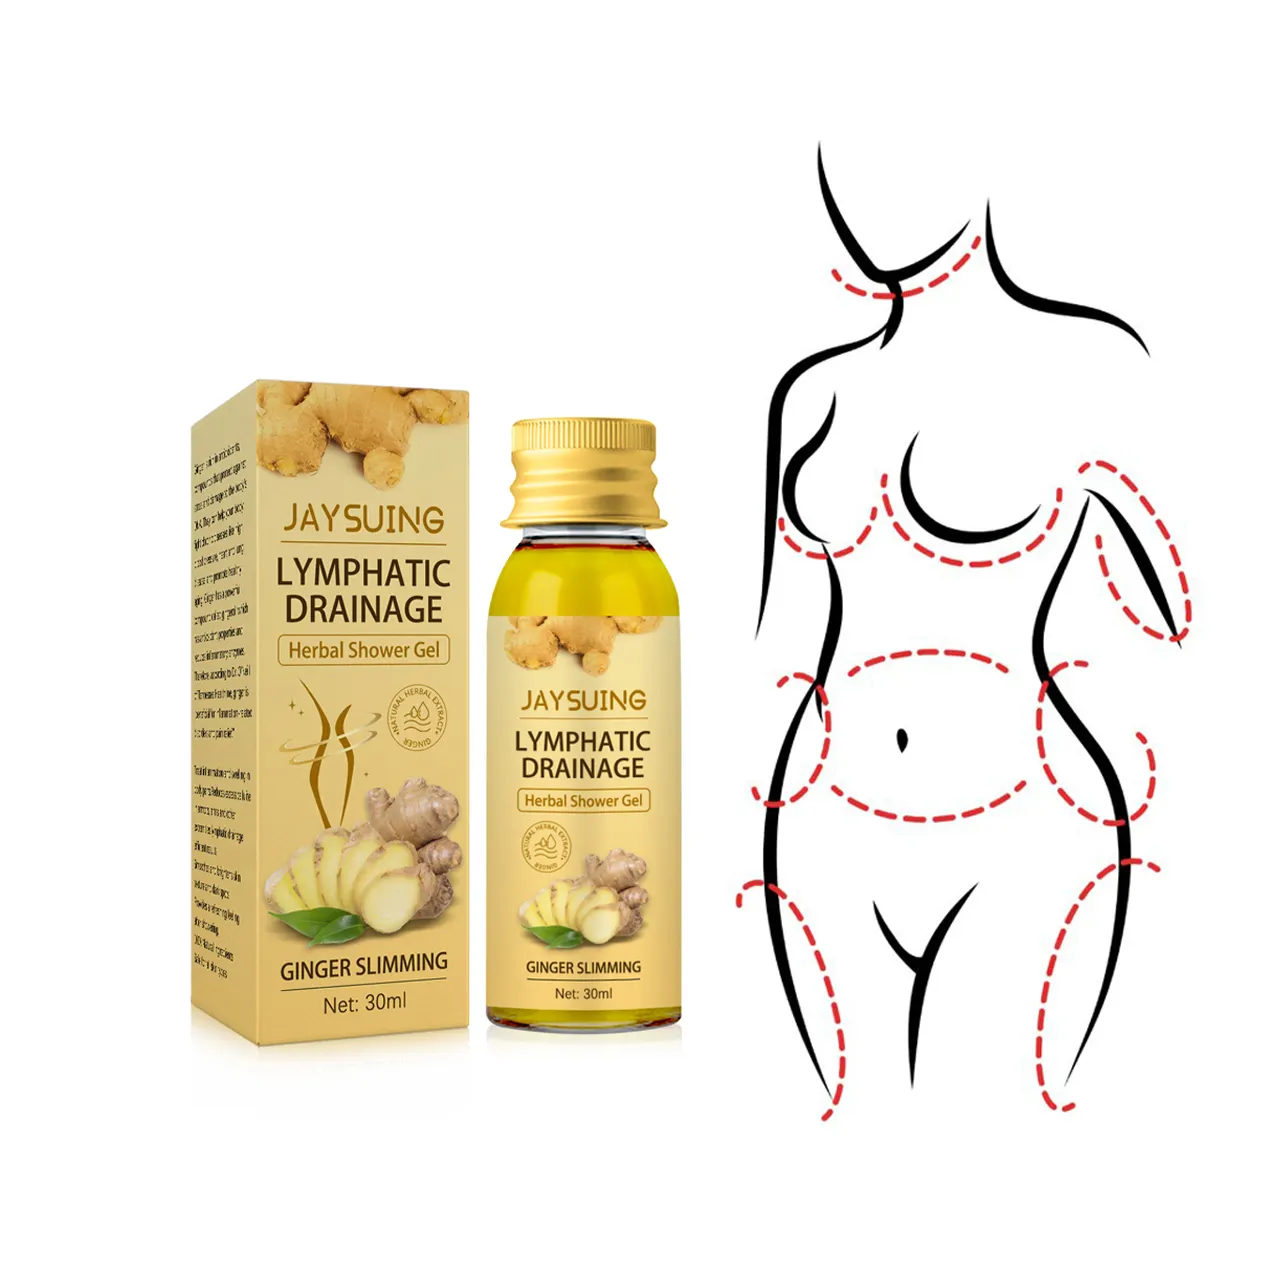 Ginger Body Shaping Bath Gel Relieving Lymphatic Fibrosis Cleaning Moisturizing Slimming Gel